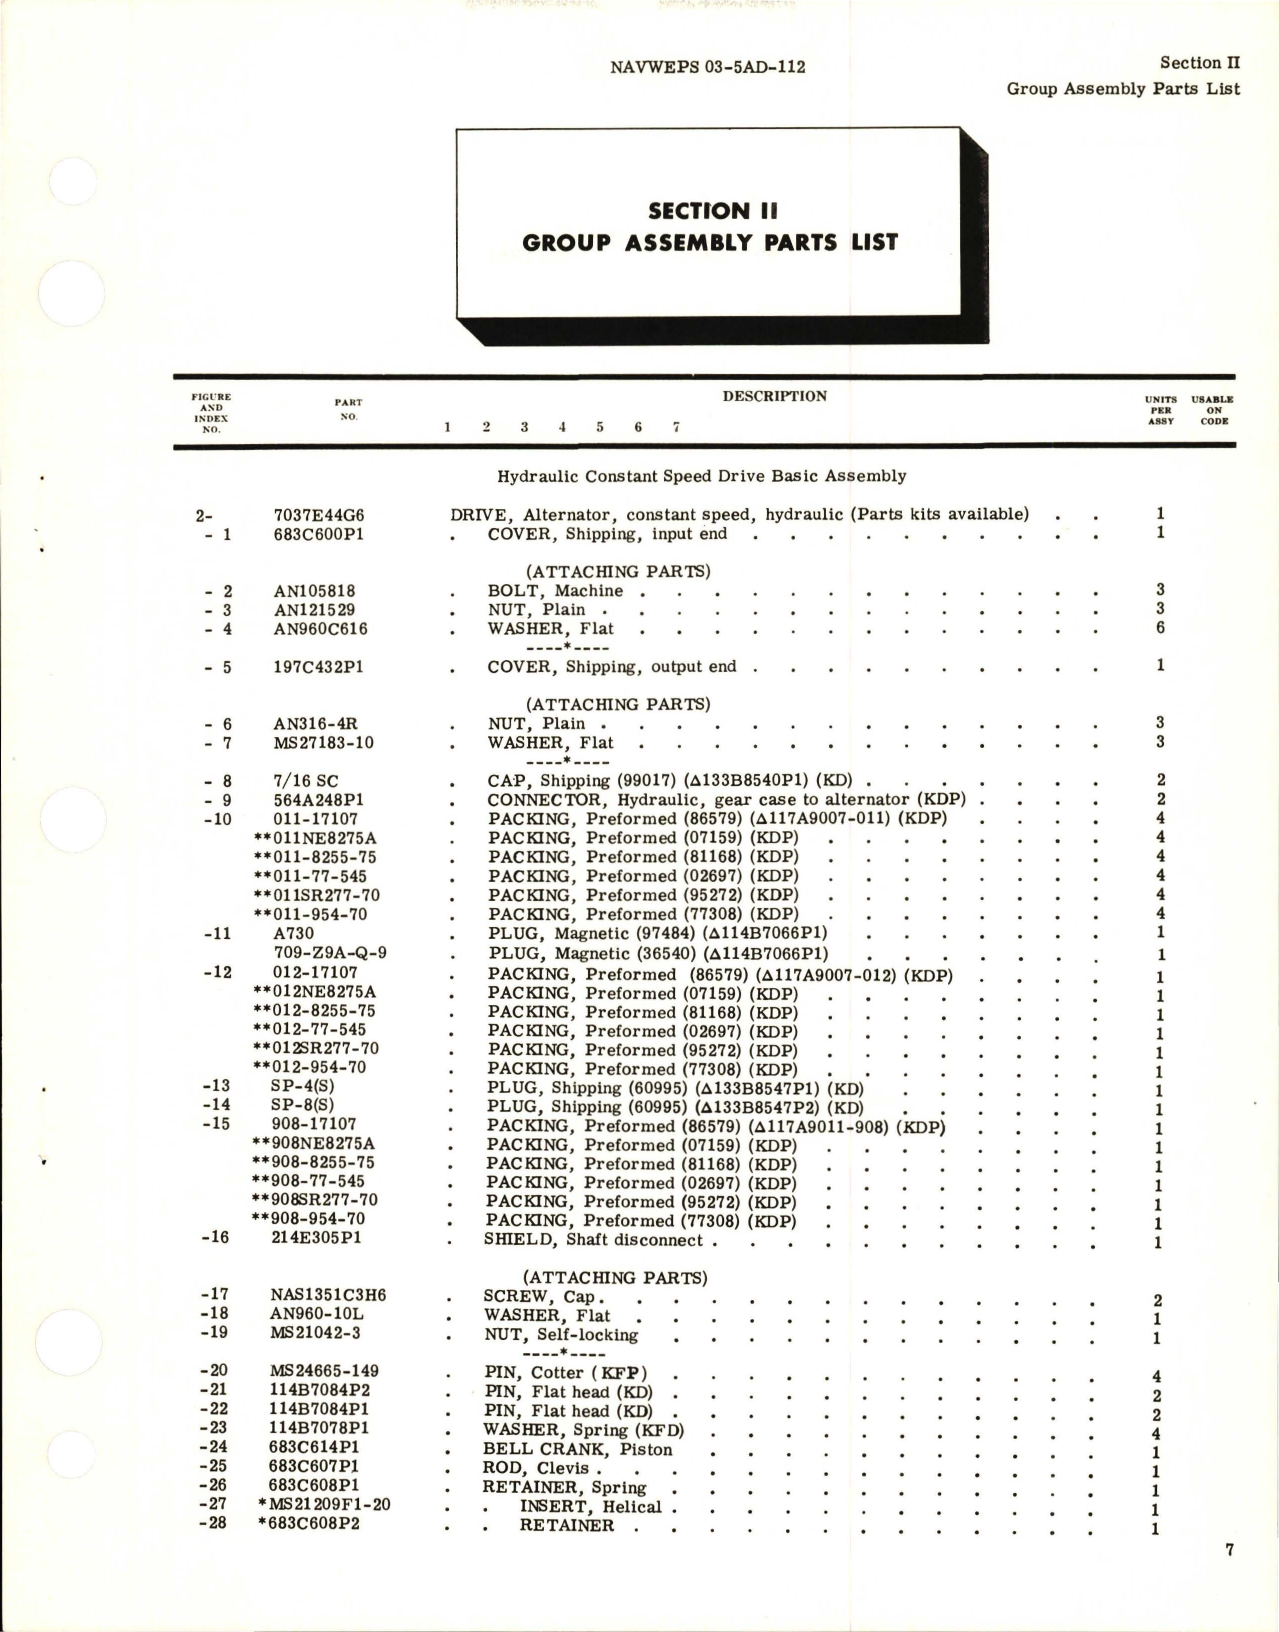 Sample page 9 from AirCorps Library document: Illustrated Parts Breakdown for Hydraulic Constant Speed Alternator Drive - Model 2CLGD20E6 - Part 7037E44G6 